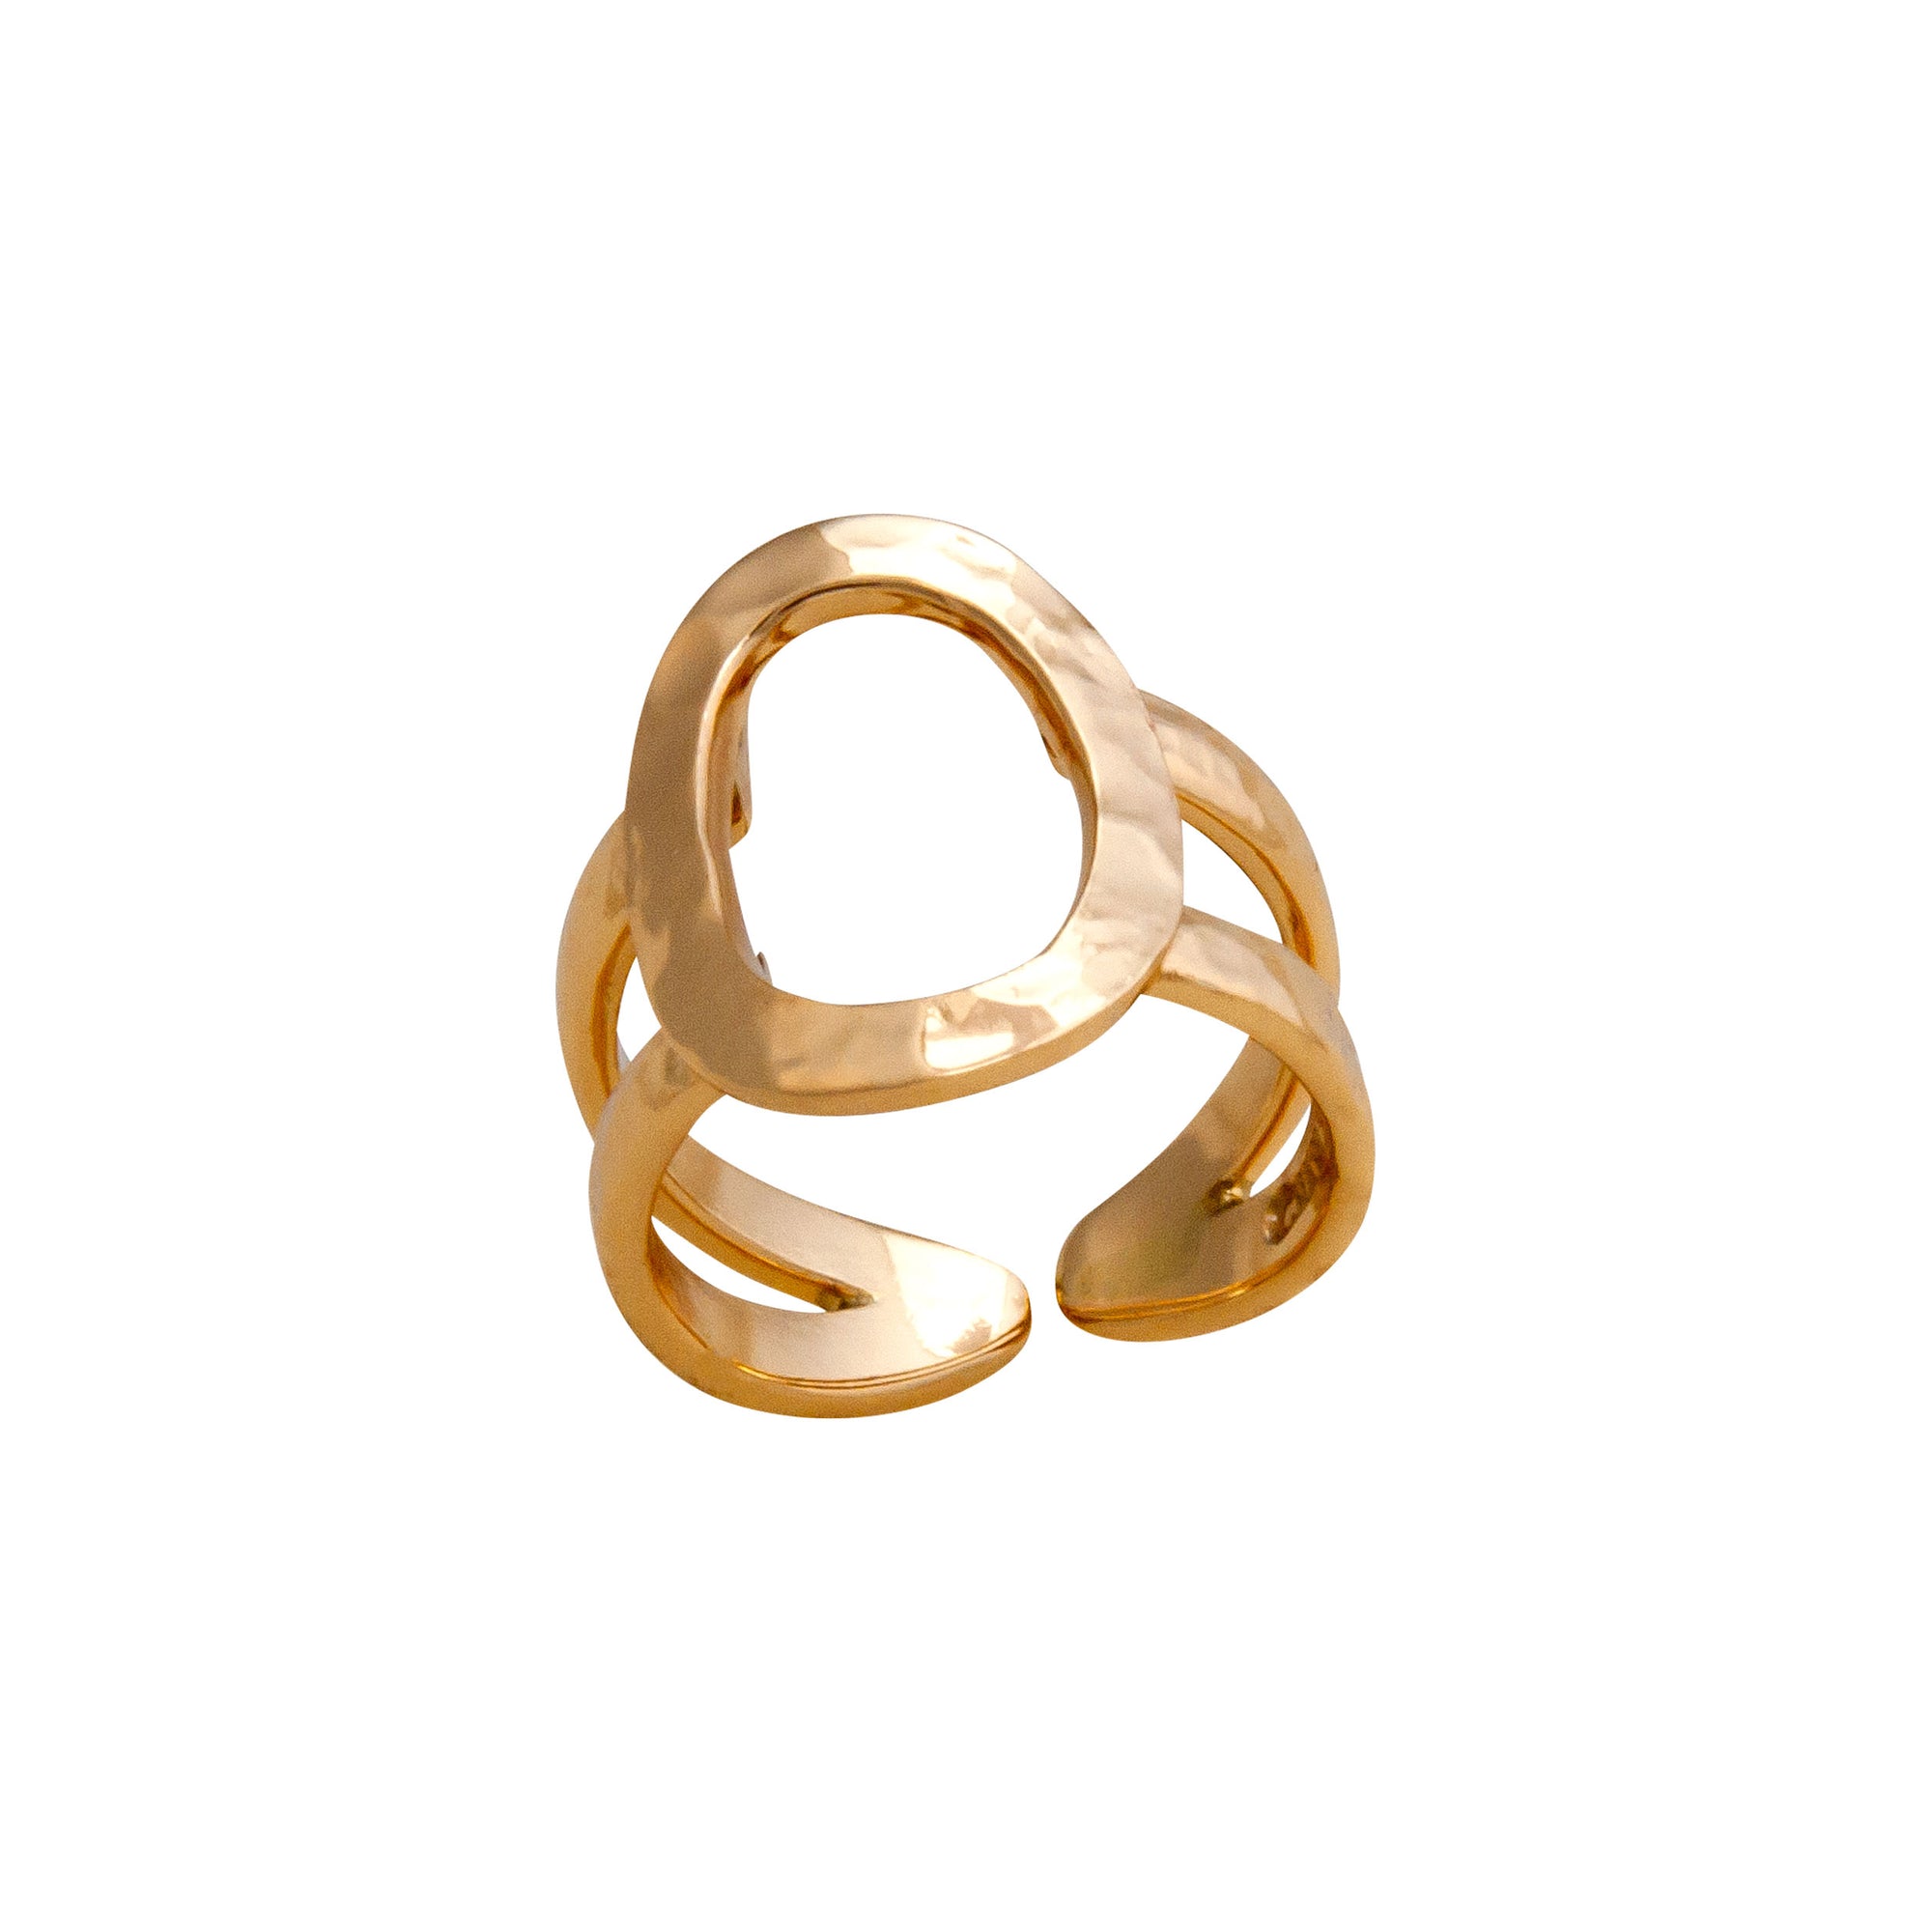 Alchemia Open Oval Hammered Adjustable Cuff Ring | Charles Albert Jewelry